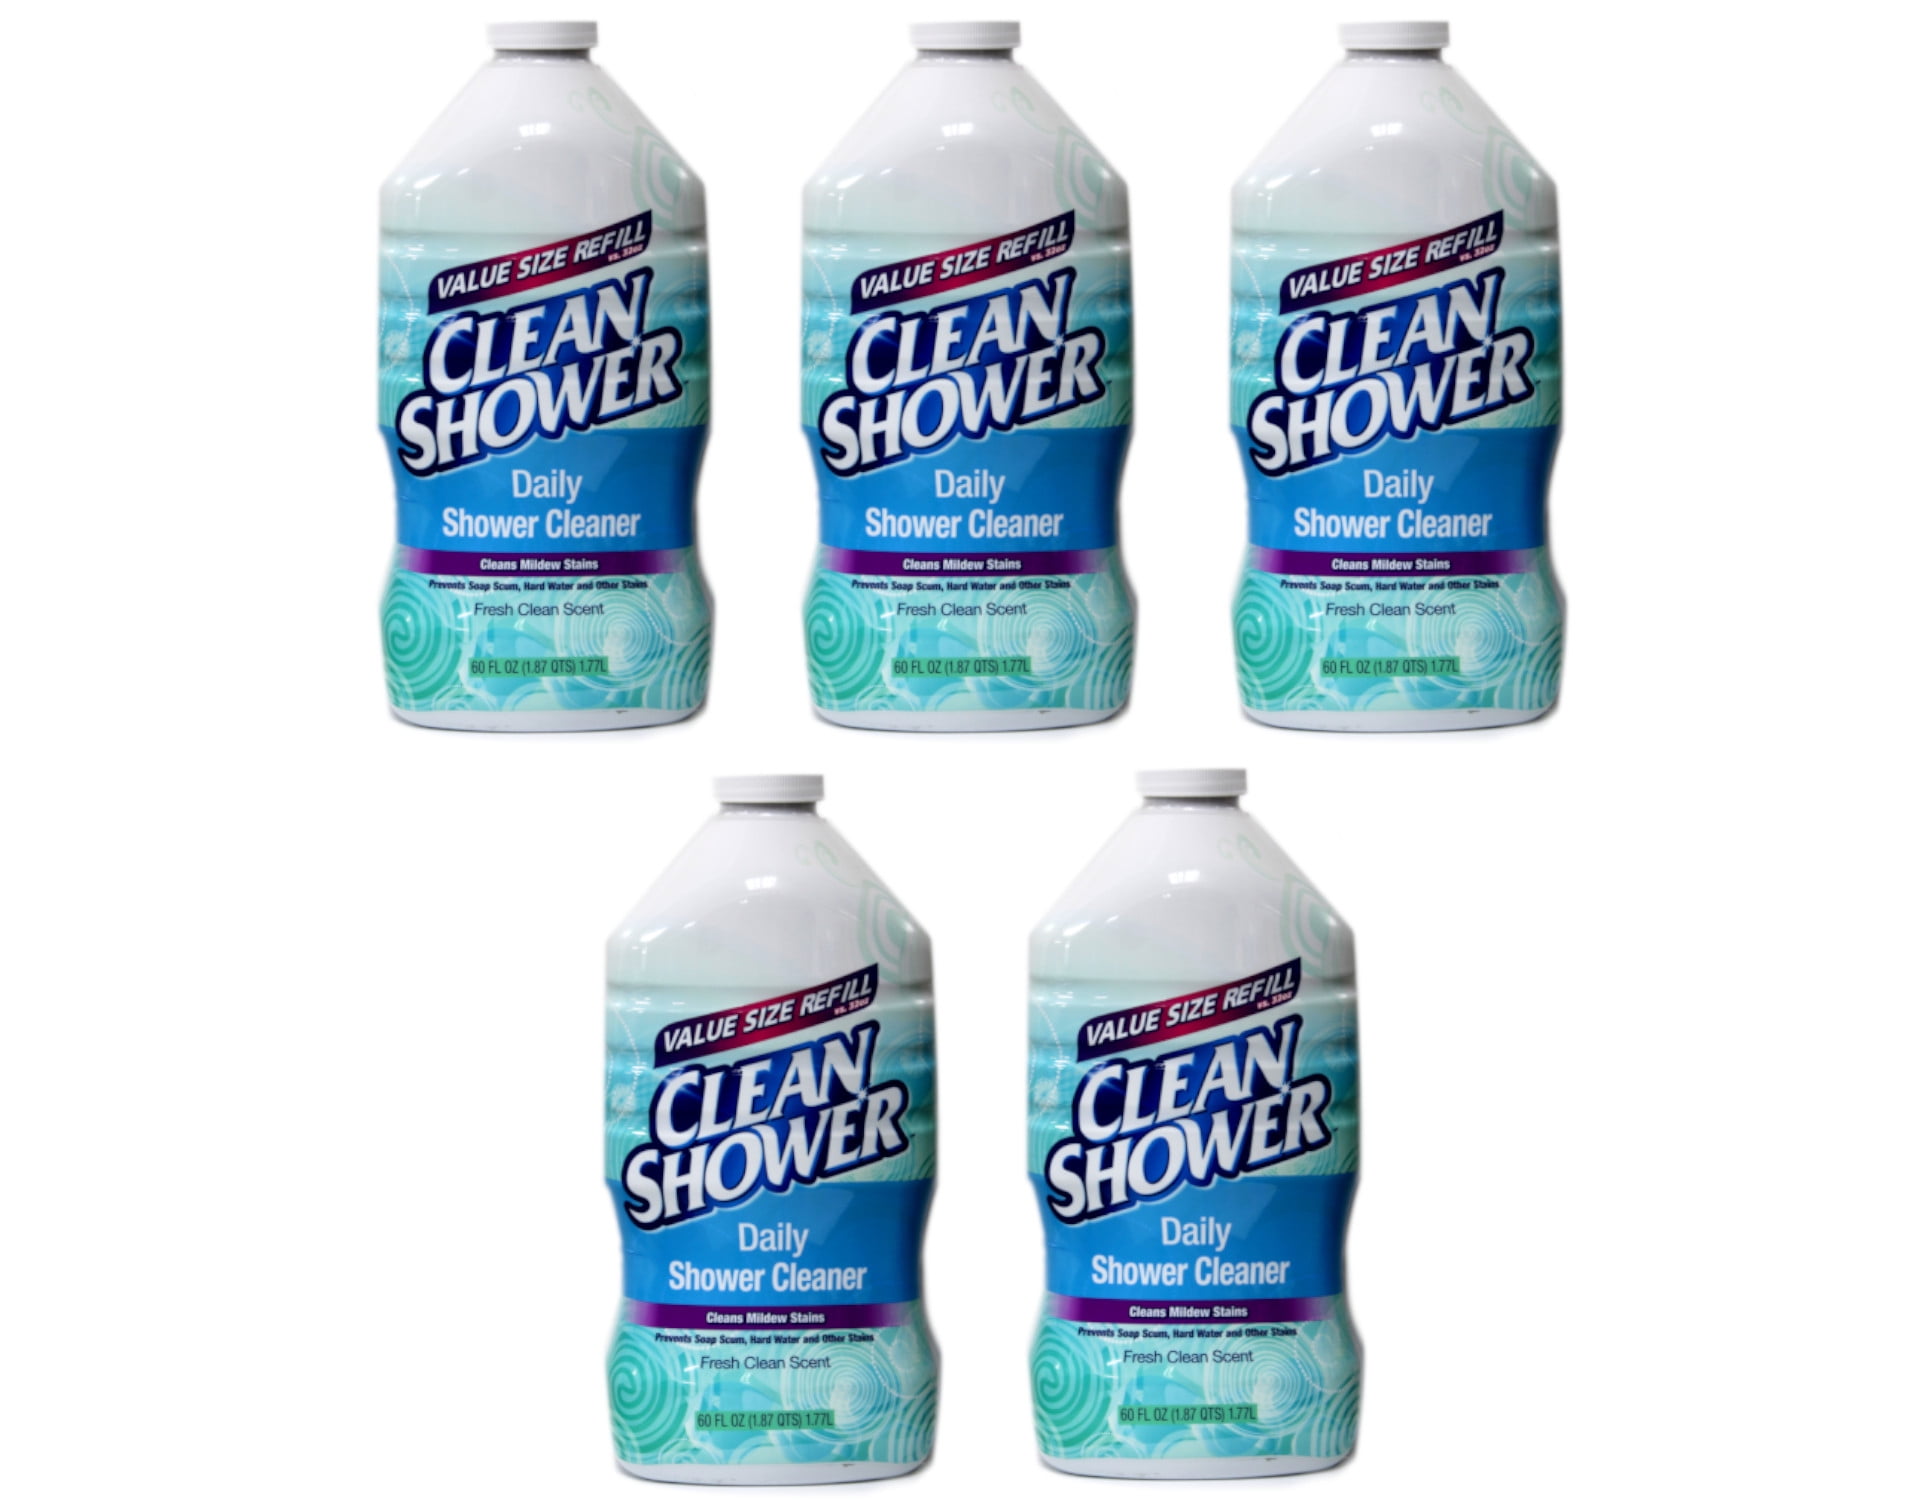 Clean Shower Fresh Clean Scent Daily Shower Cleaner, 32oz - 5 Pack